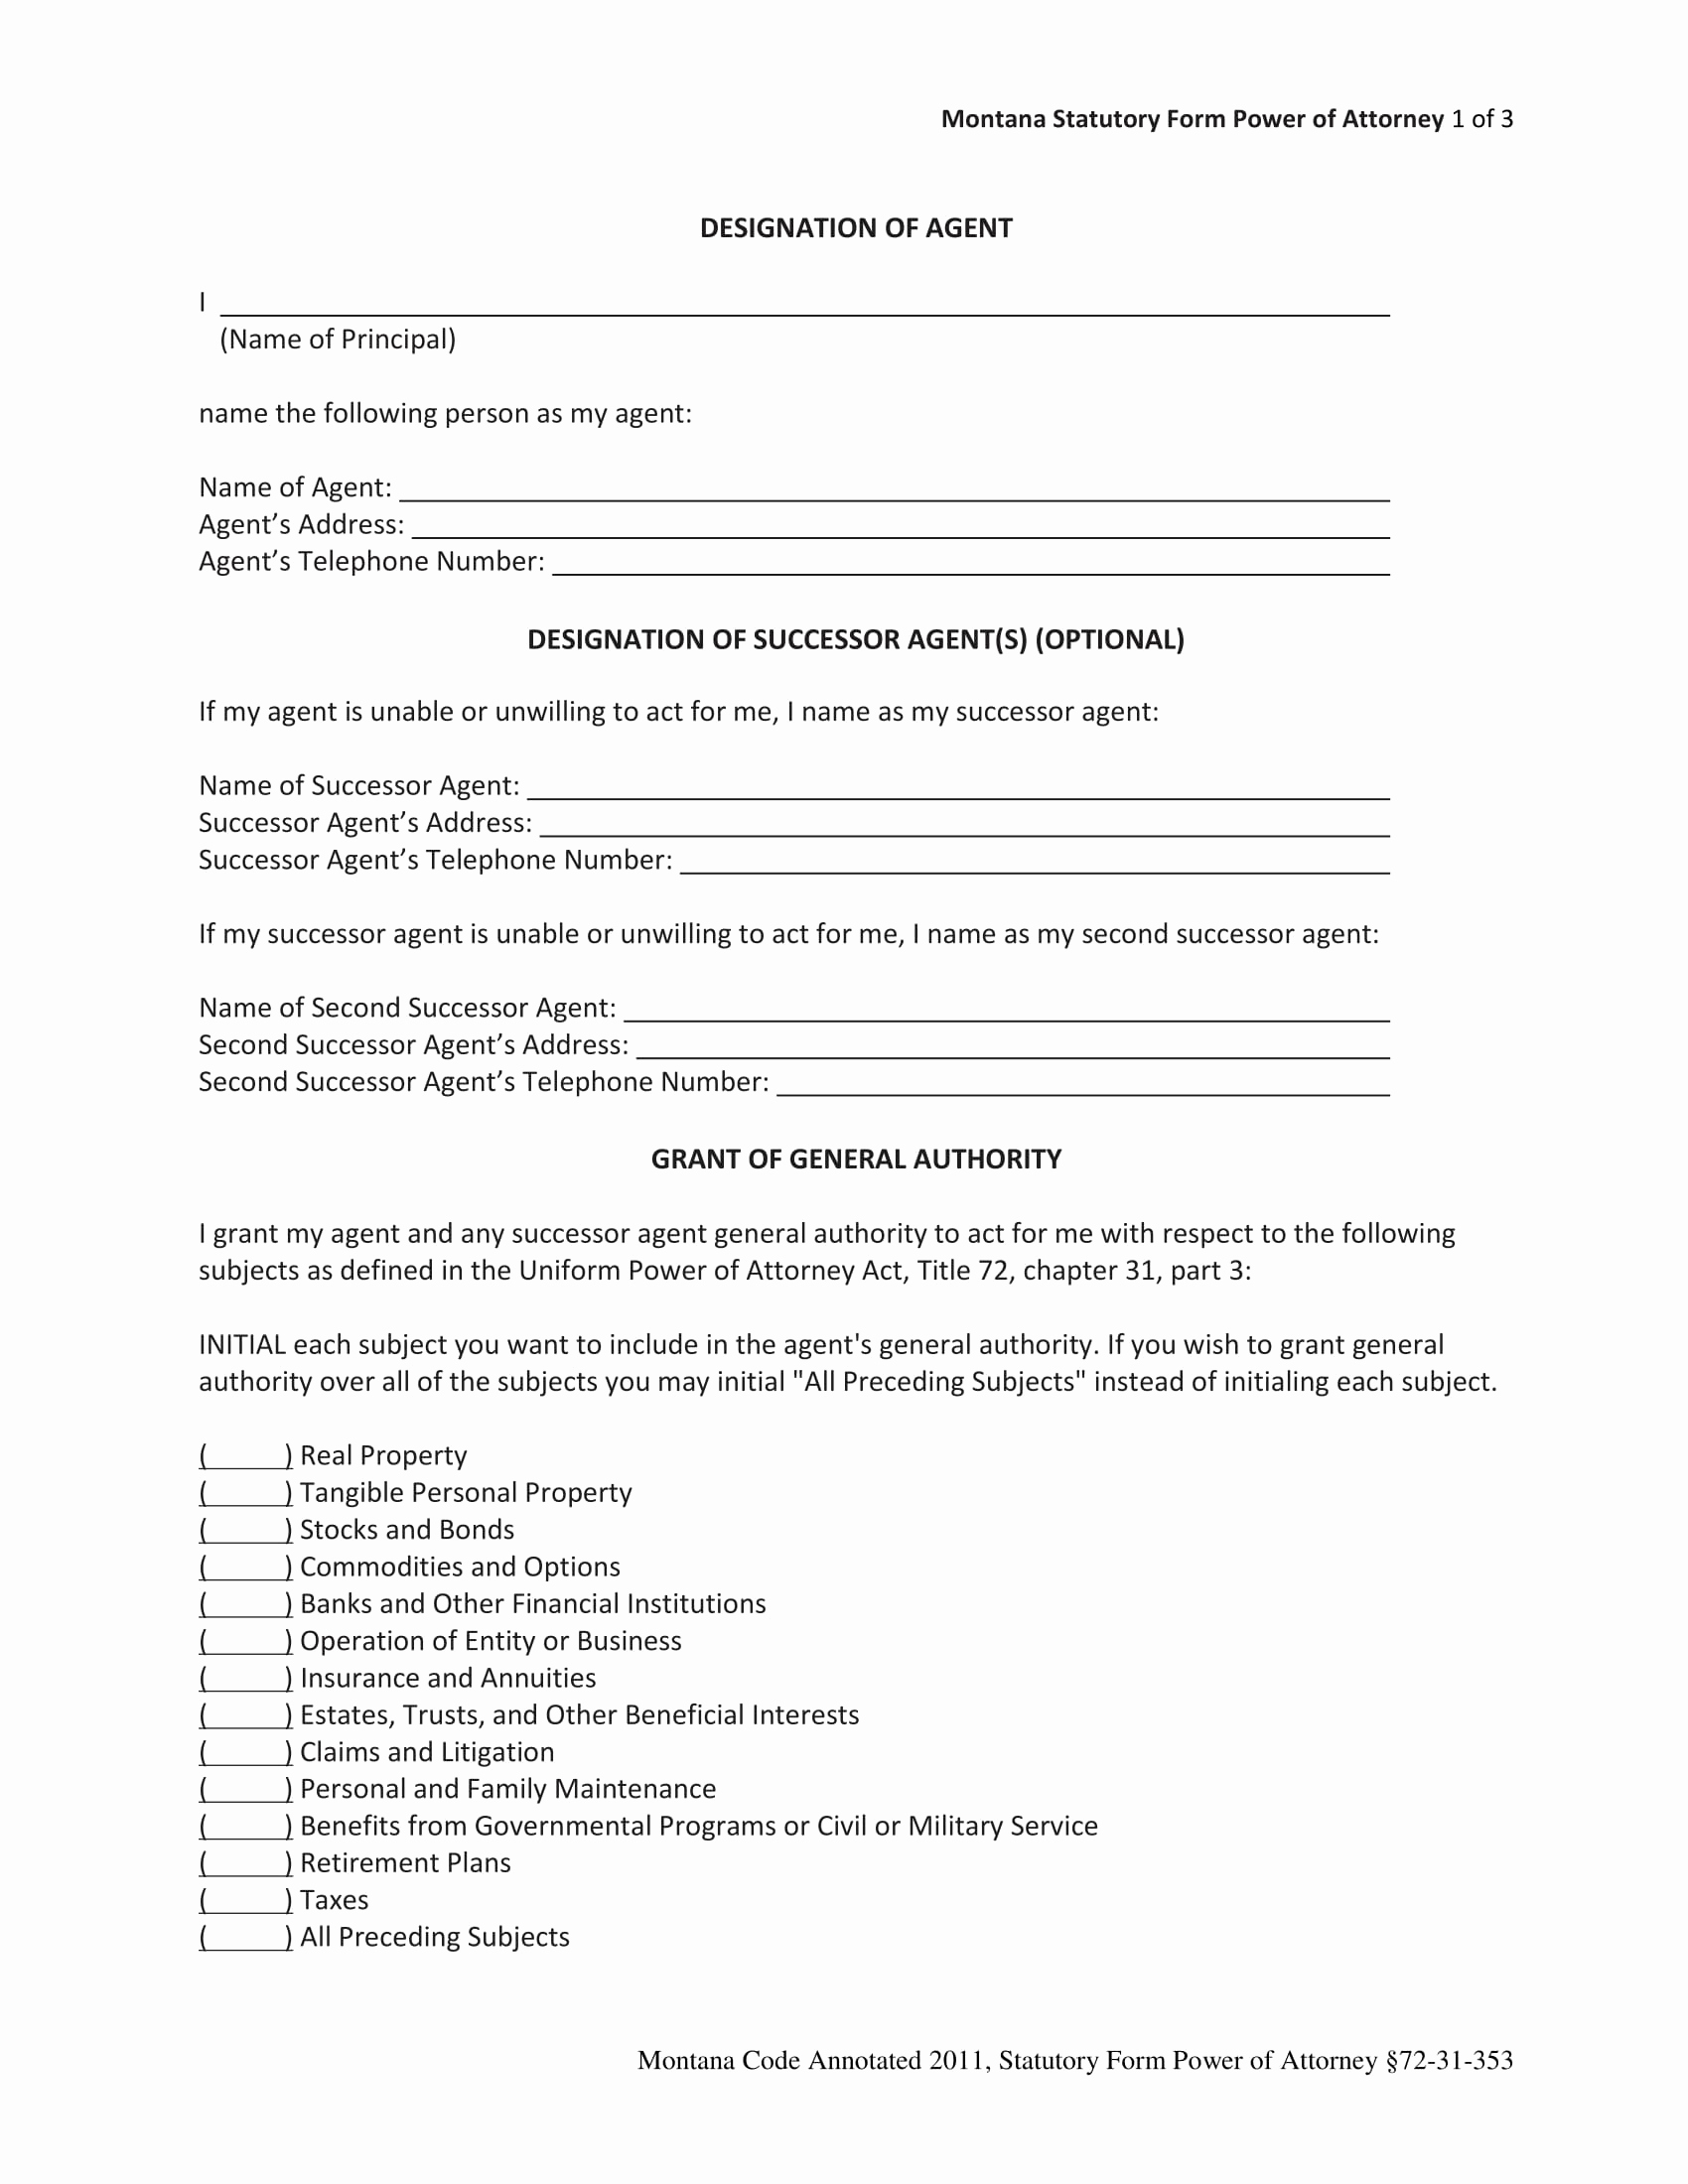 Free Power Of attorney forms Elegant 10 Power Of attorney forms